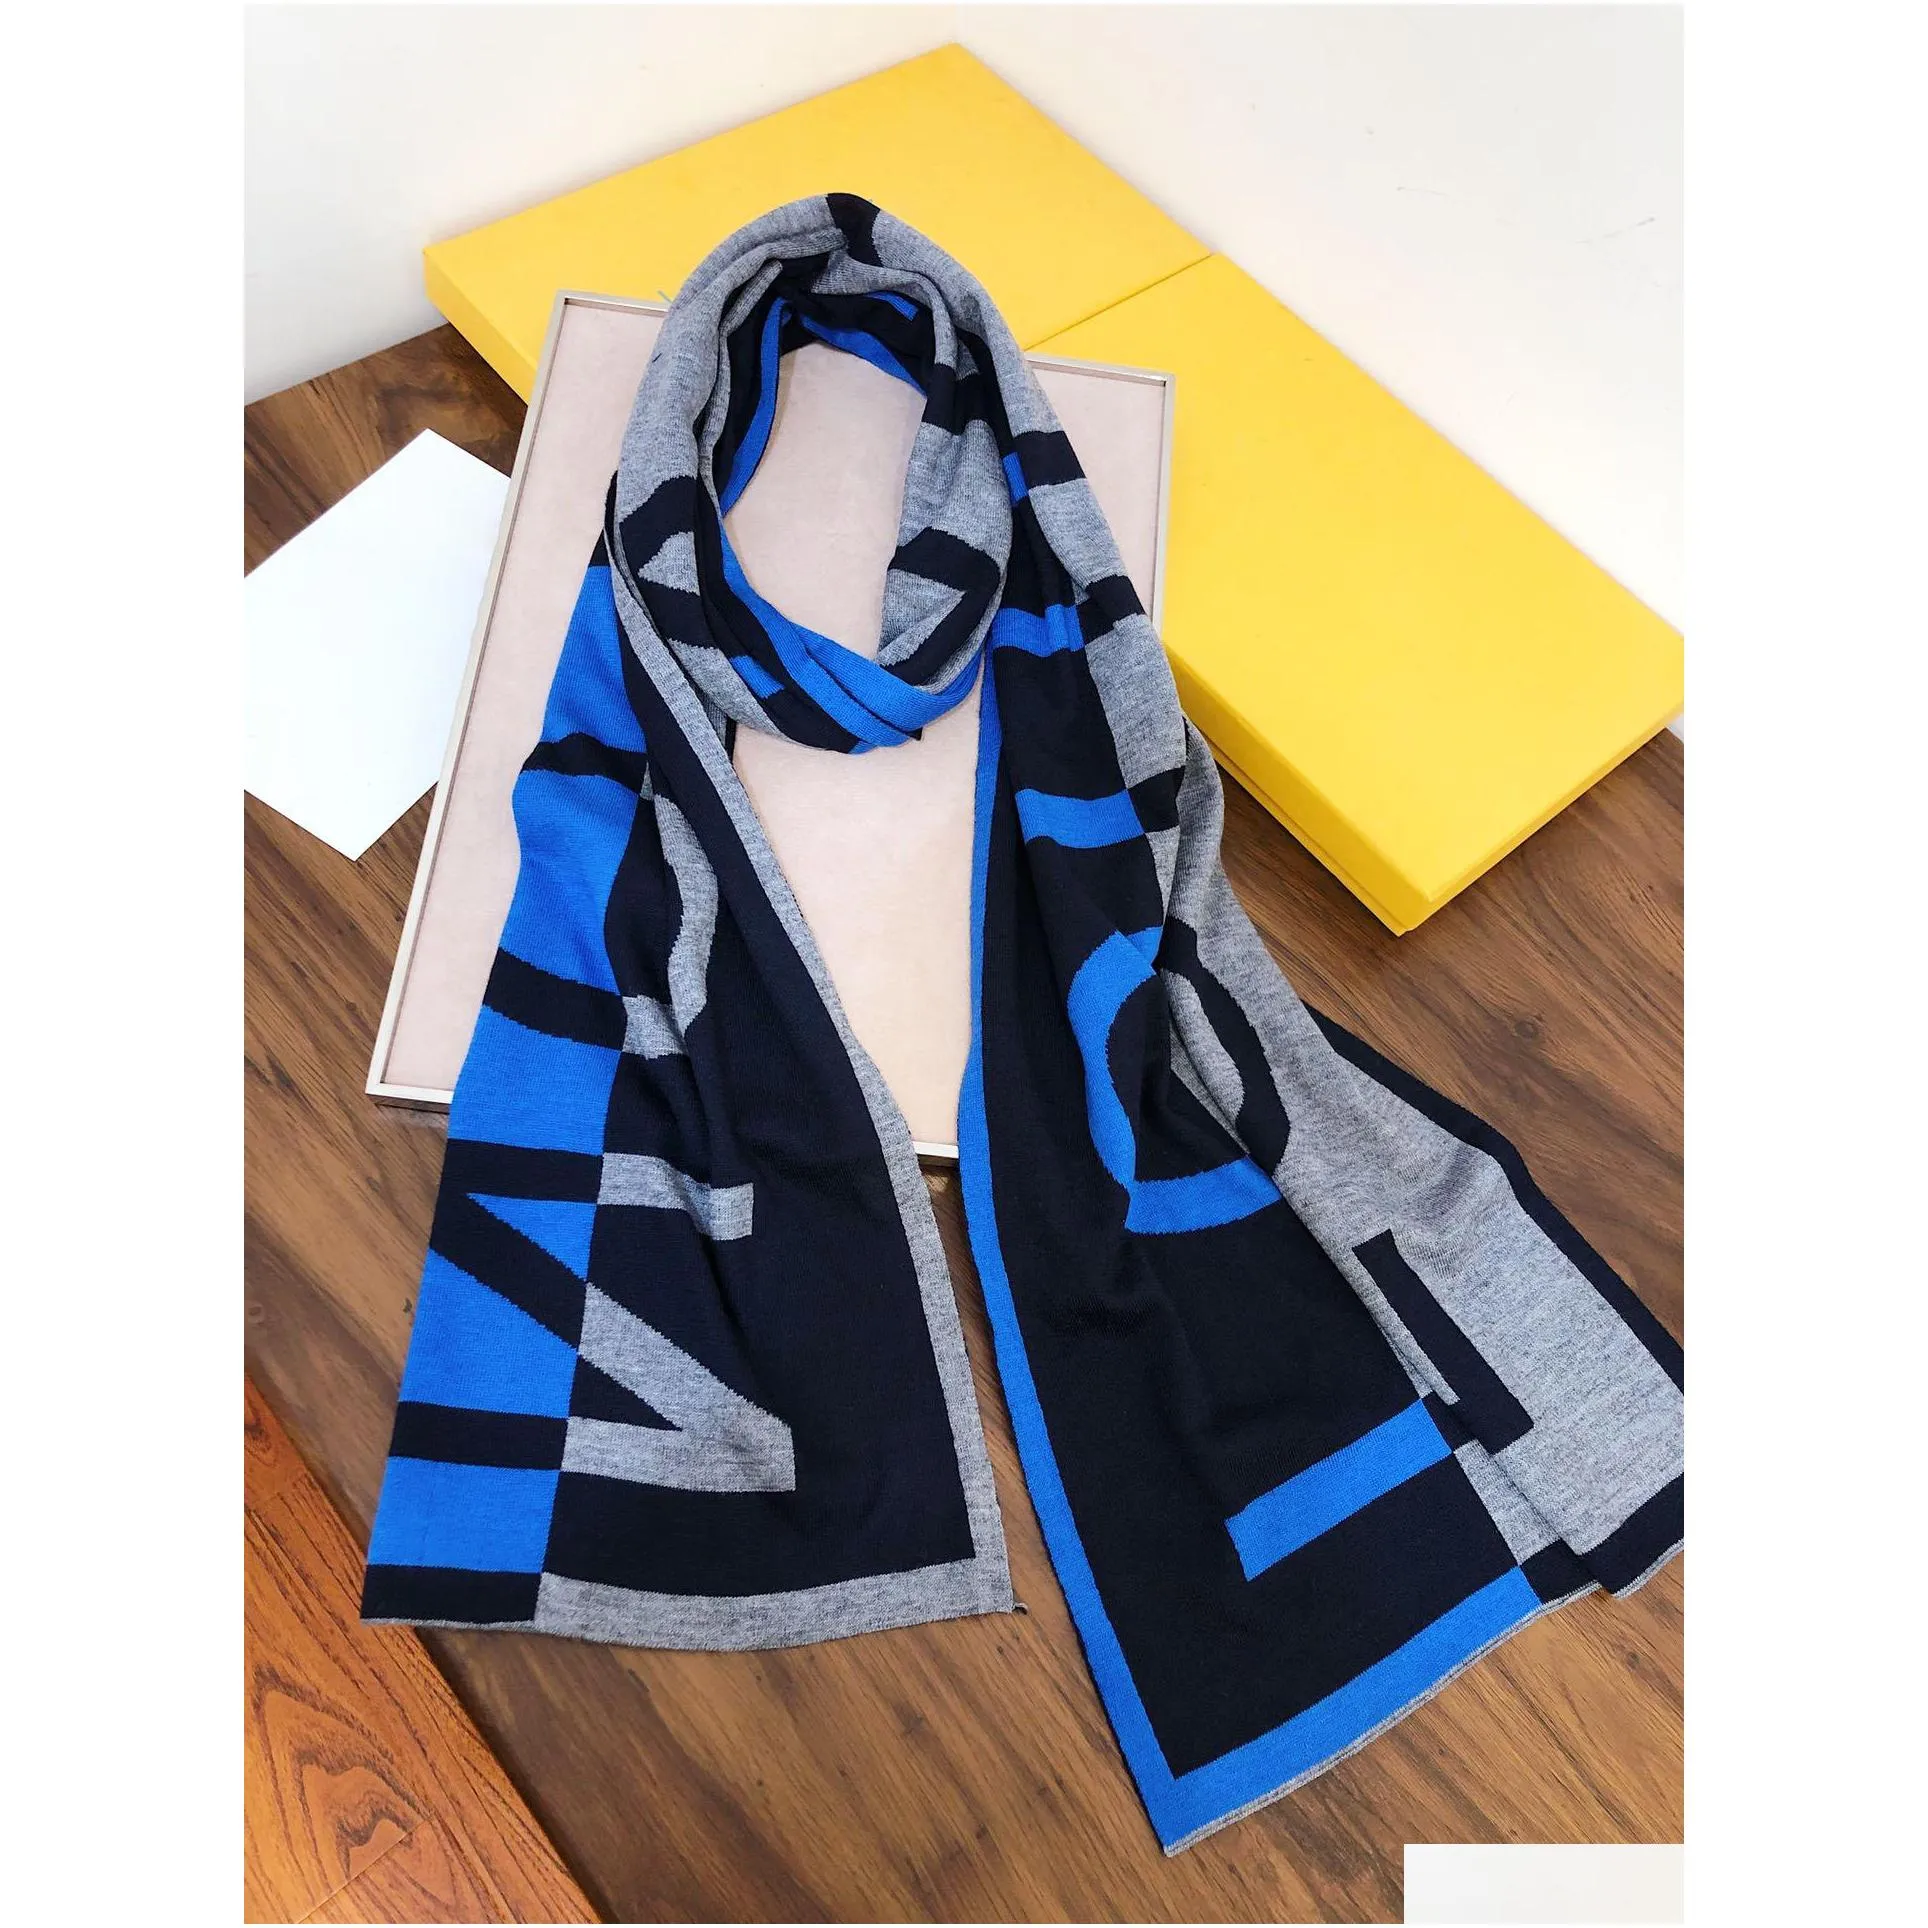 100 cashmere mens designer scarf man printed embroidery style shawls winter print satin square head women scarves big size 180x65 cm with gift